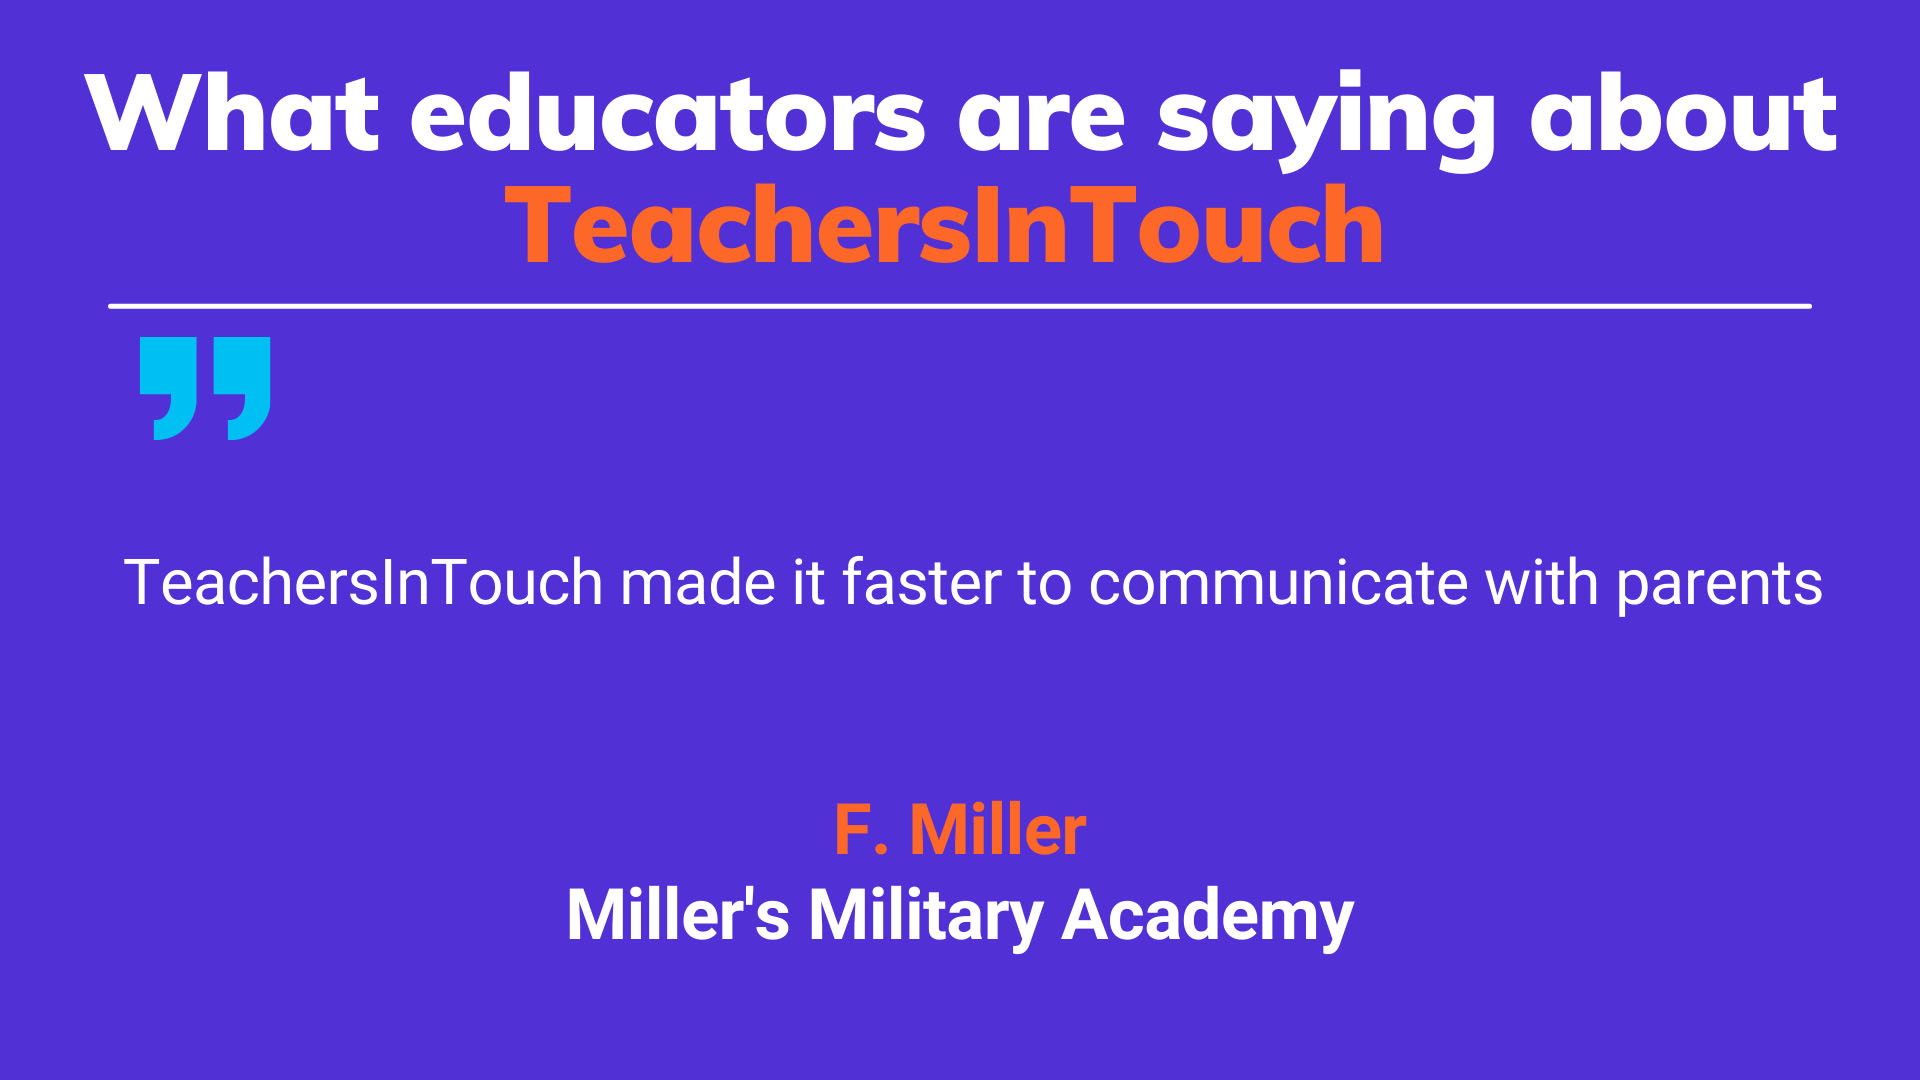 What educators are saying about us